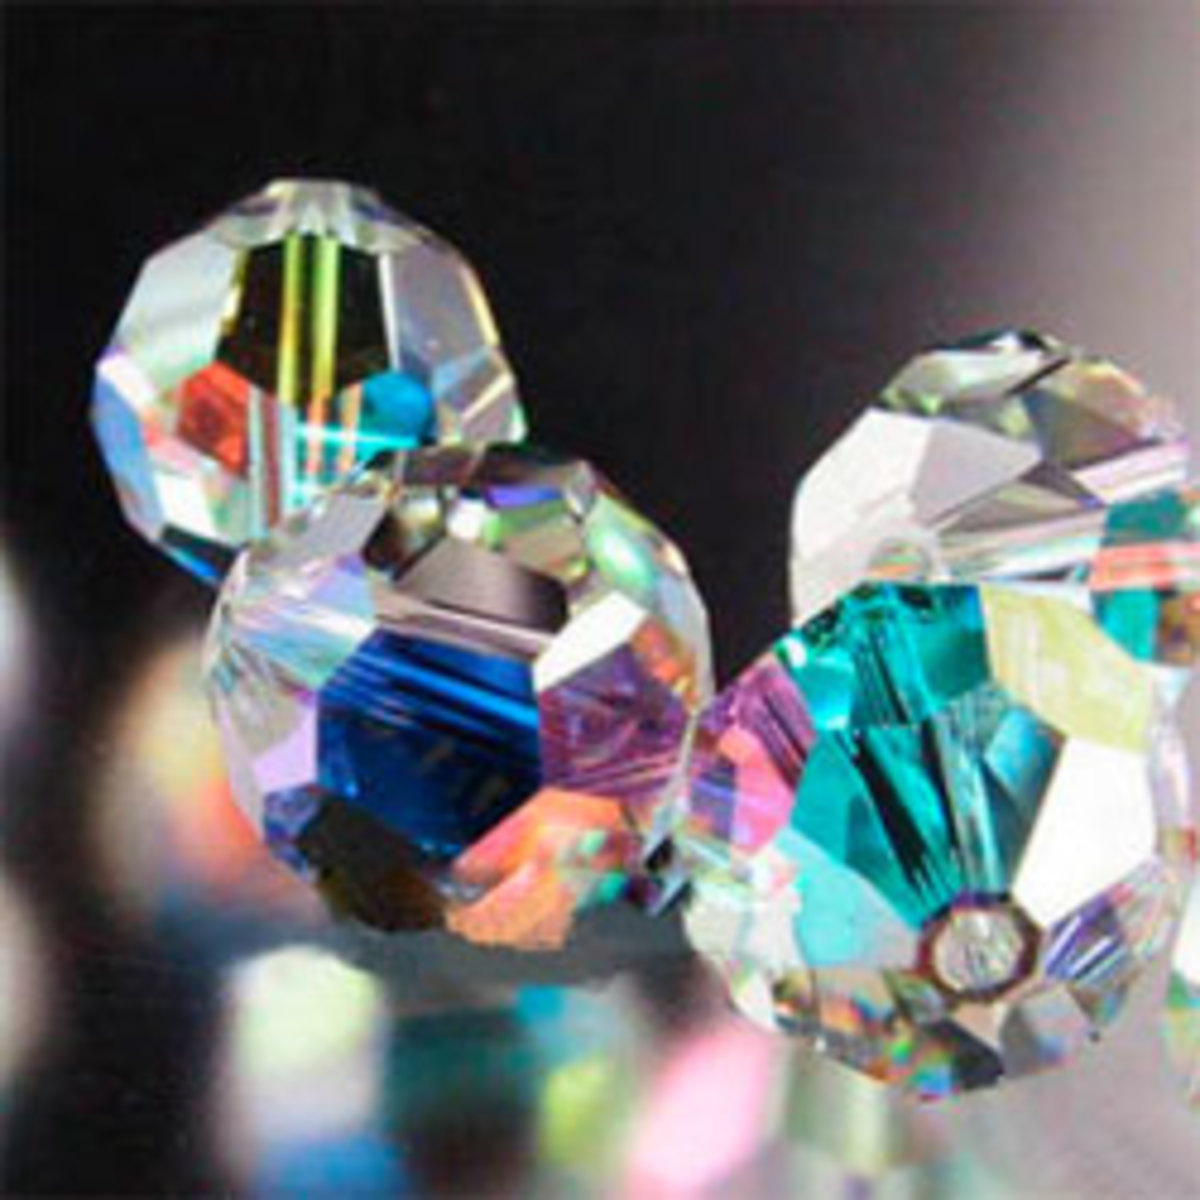 An example of AB coating on Swarovski crystal. This coating makes the crystal reflect rainbows in sunlight and is often used in jewelry and suncatchers.